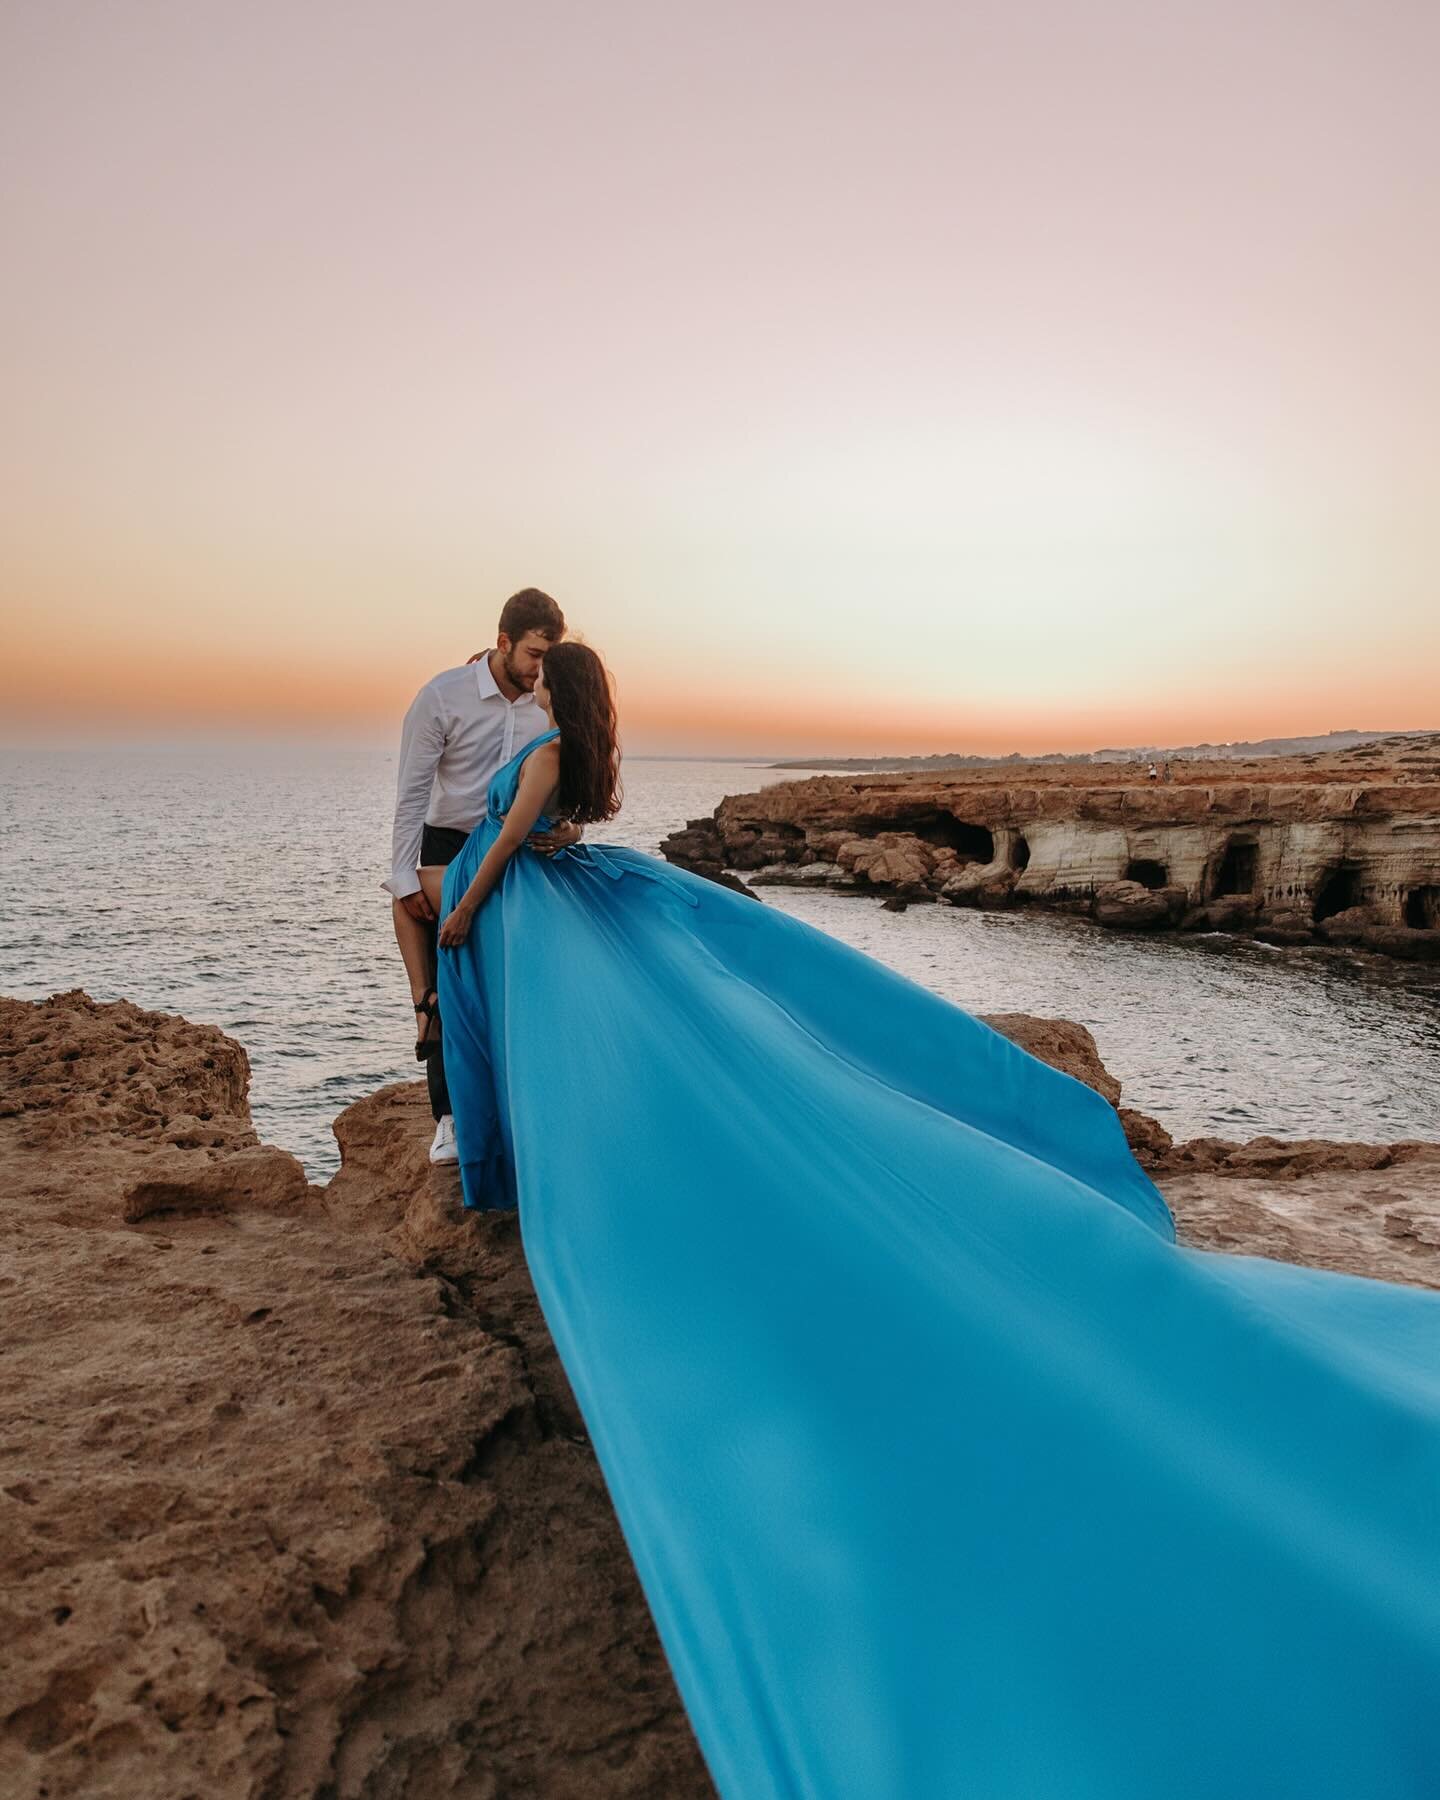 Photoshoot in flying dresses of different colors is available in Cyprus 

Are you planning a visit to our beloved island? Book an amazing photoshoot with our Flying dresses.

We have flying dresses in multiple colours and our Photography is accompani